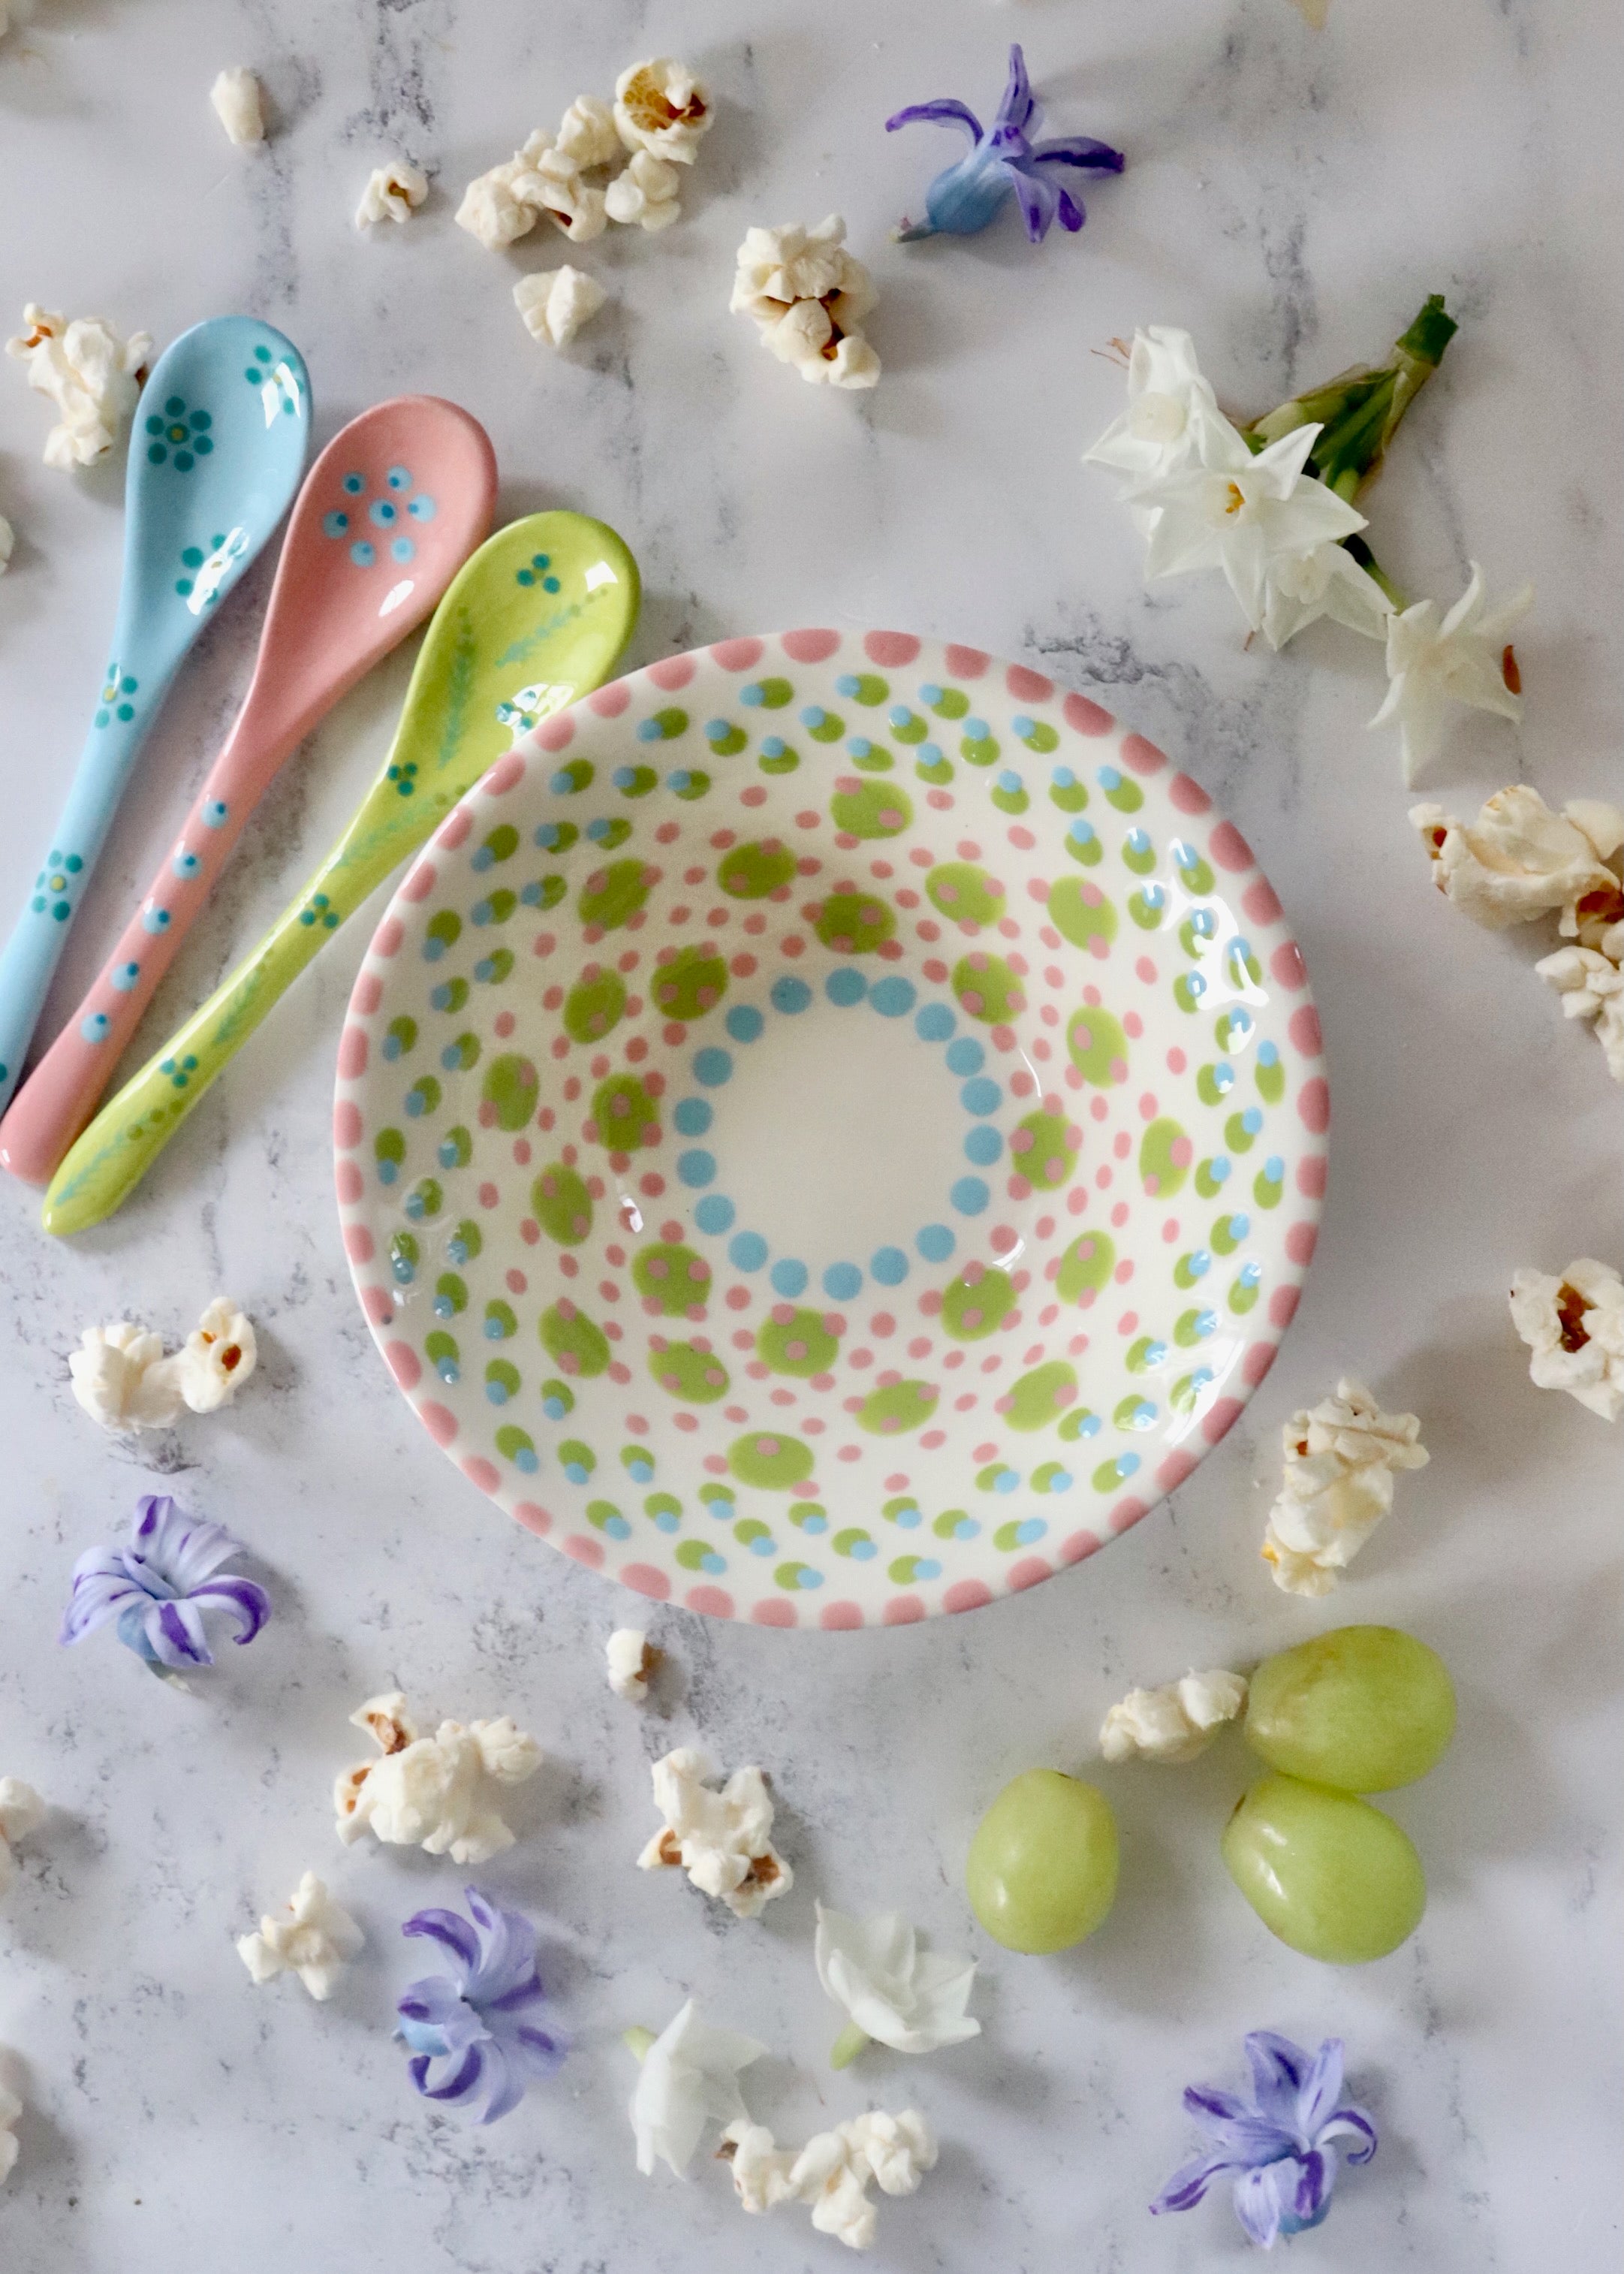 New In: Nut Bowl - White with Lime Circles & Pink Dots